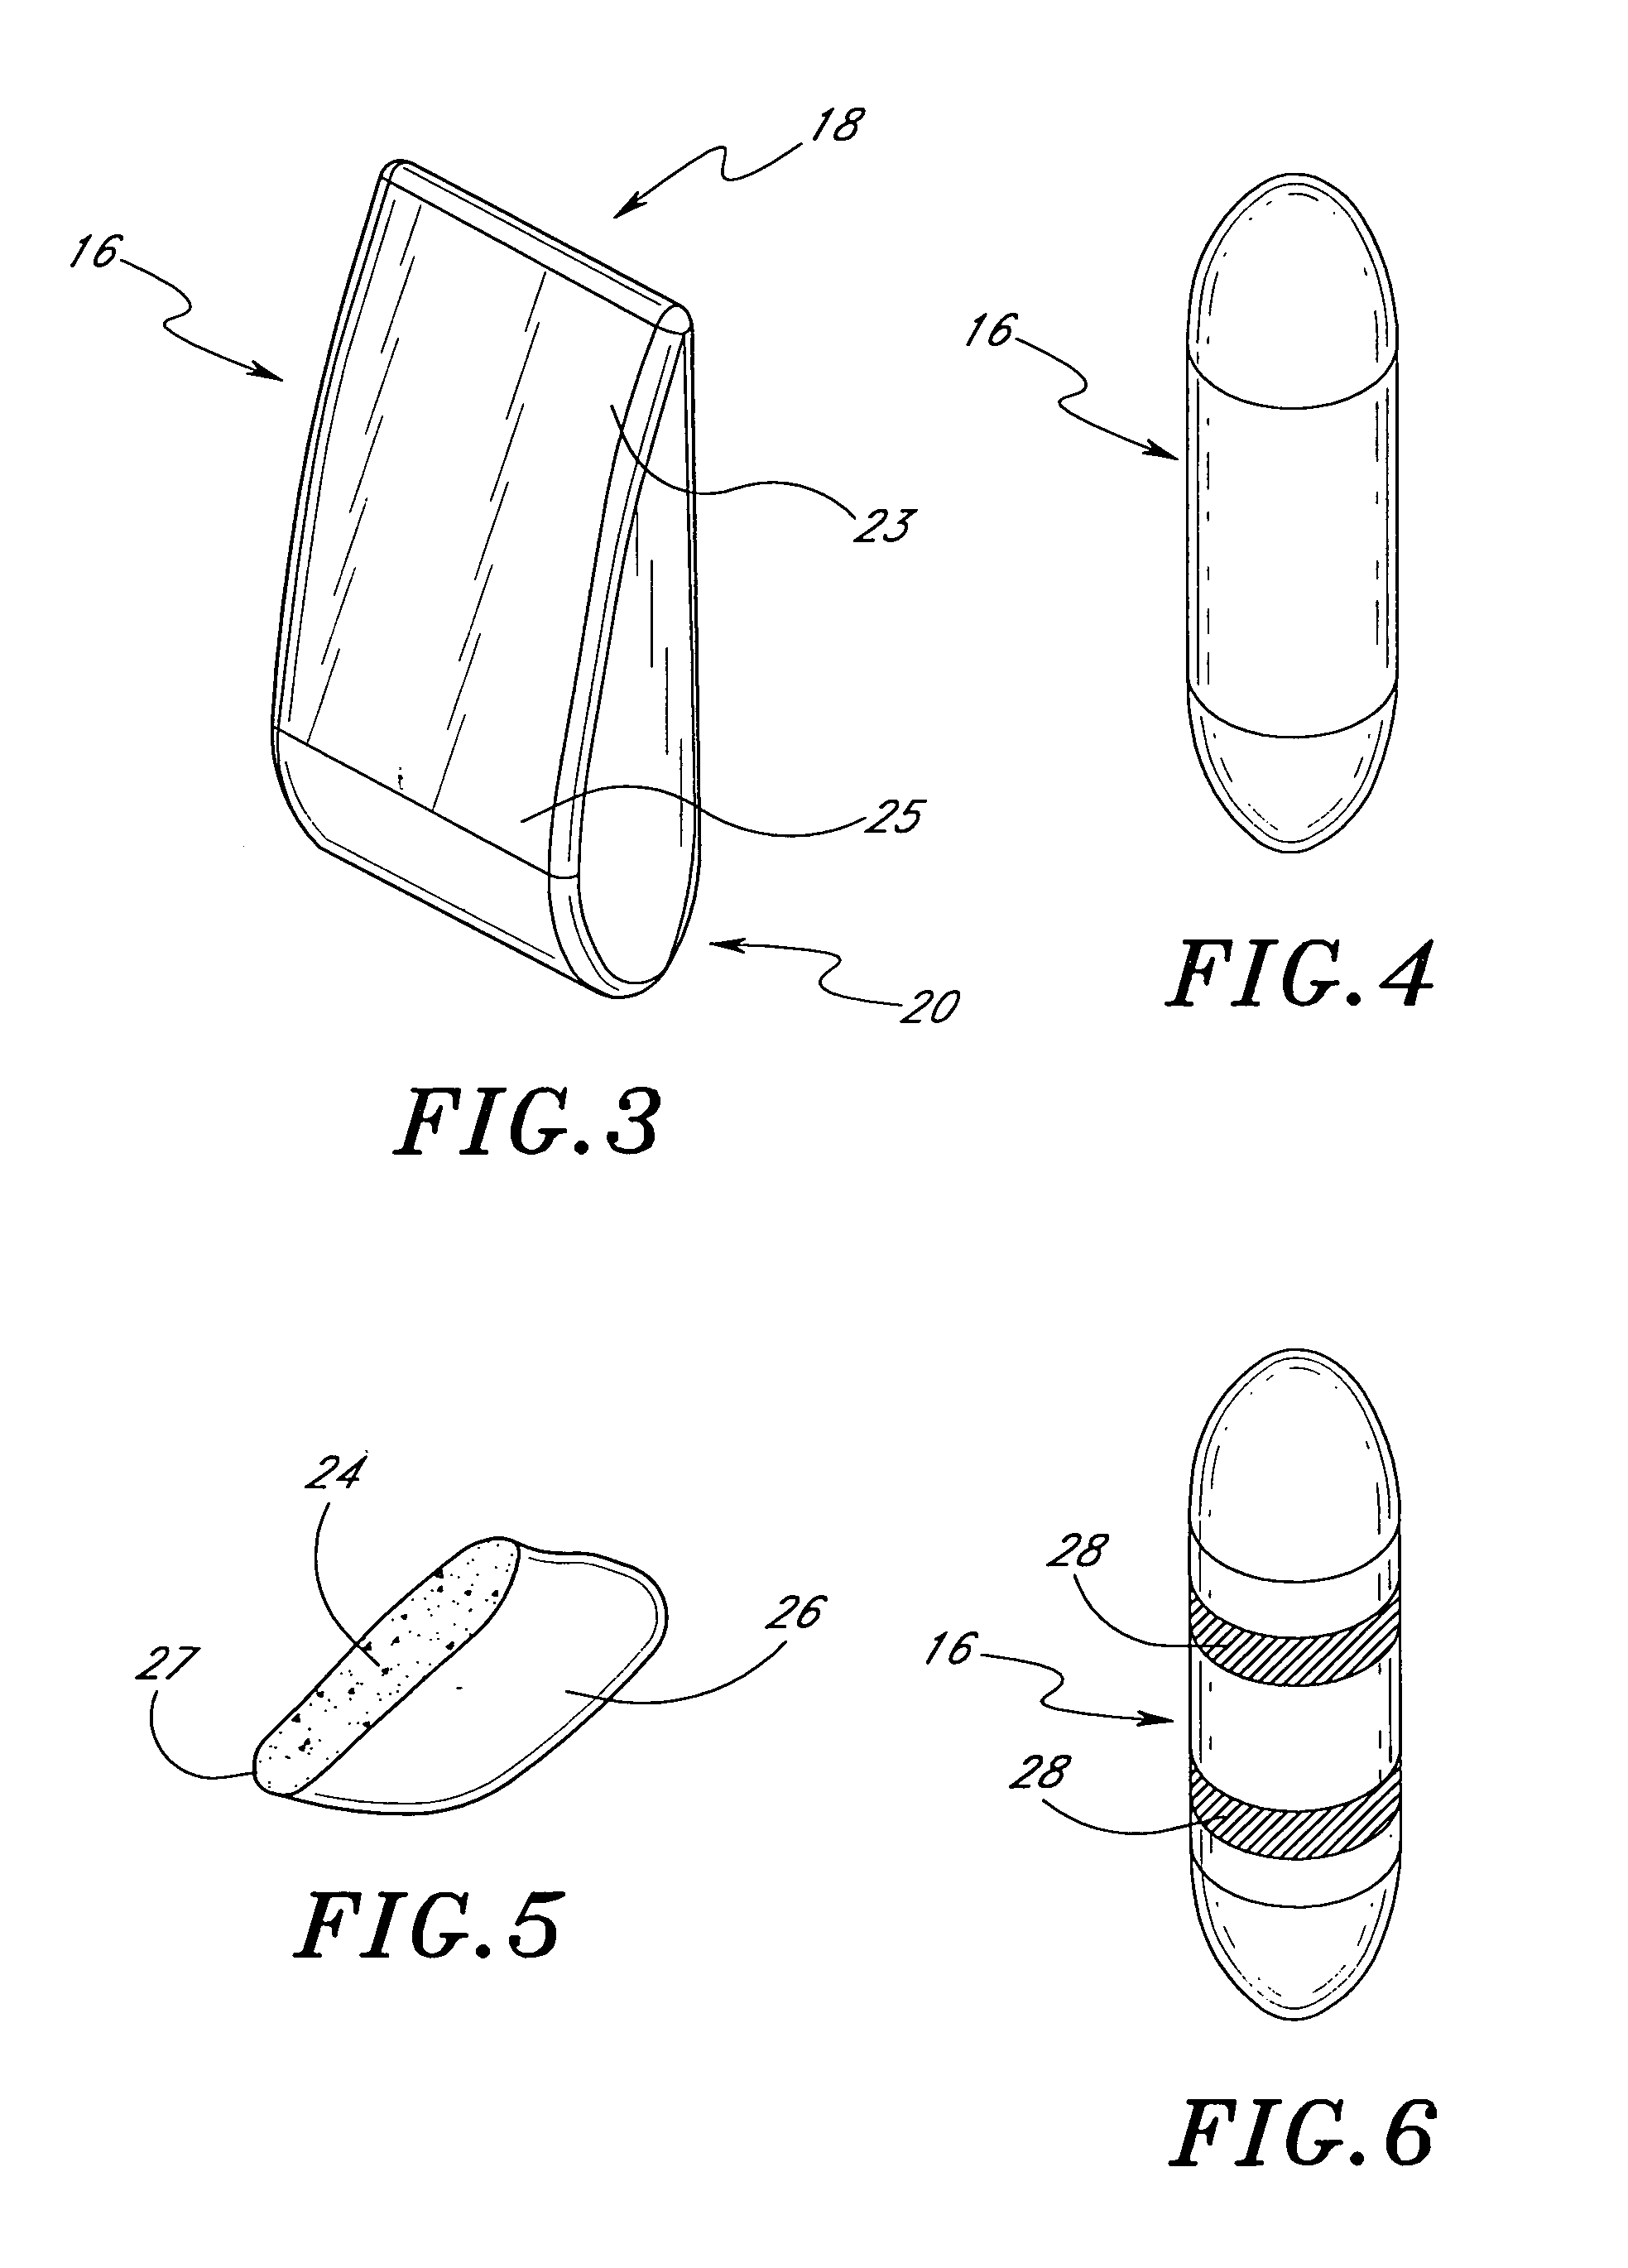 Method and device for treating gastroesophageal reflux disease